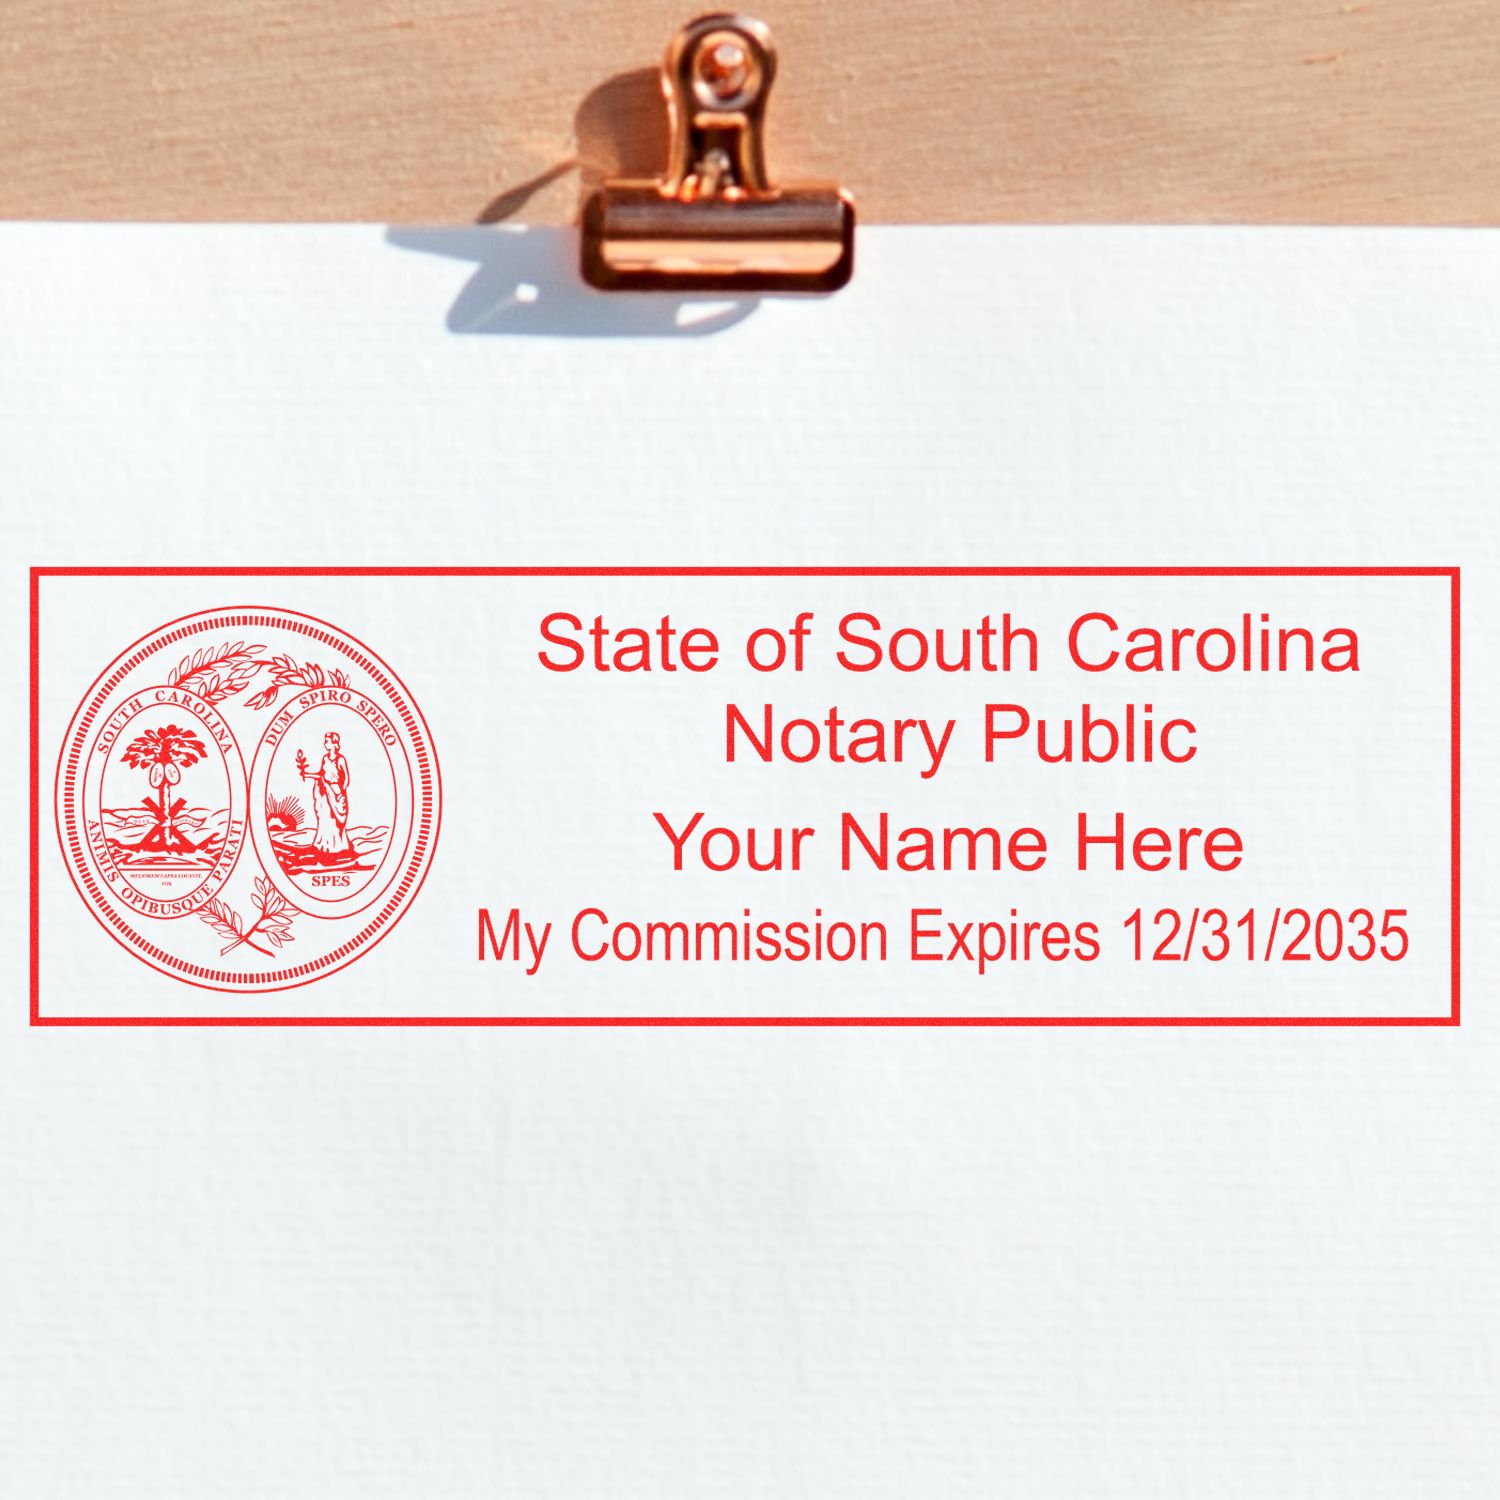 An alternative view of the Slim Pre-Inked State Seal Notary Stamp for South Carolina stamped on a sheet of paper showing the image in use